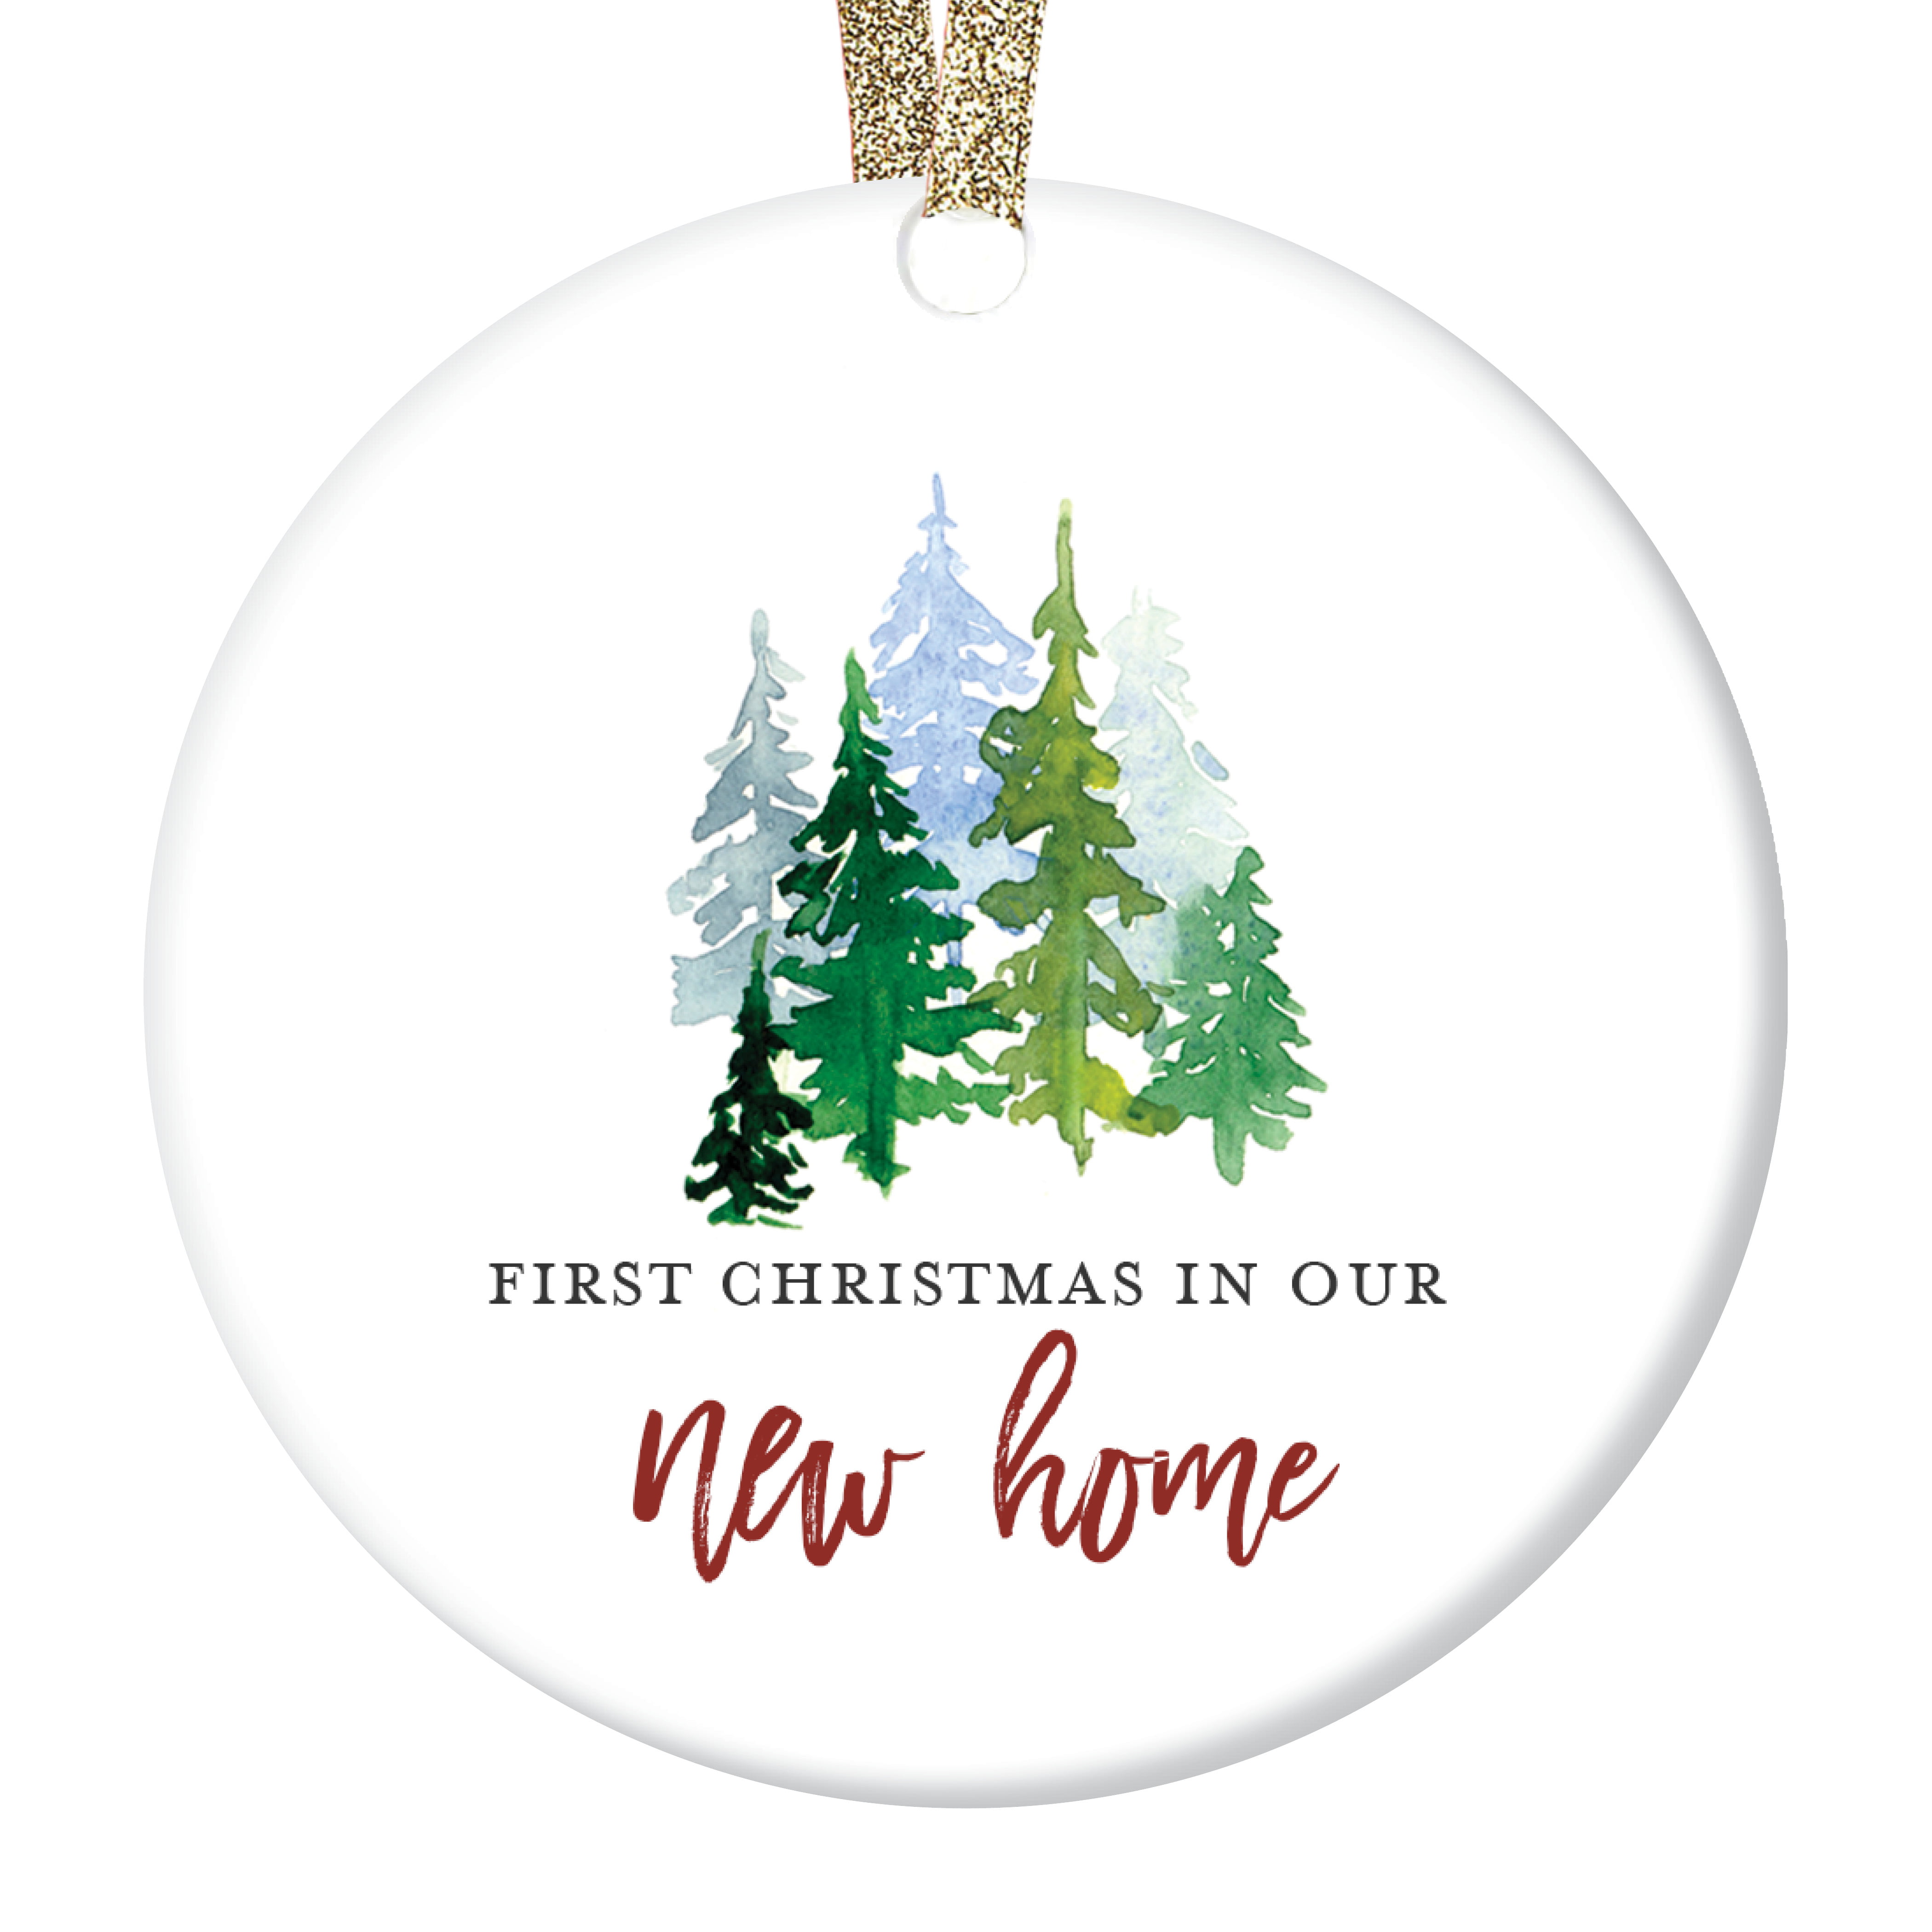 Our First Home Ornament 2021 New Home Gifts for Home Heart's Sign First Christmas in Our New Home Ornament 2021 Set of 3 New House Gifts for Newlyweds Home Our First Apartment Ornament 2021 